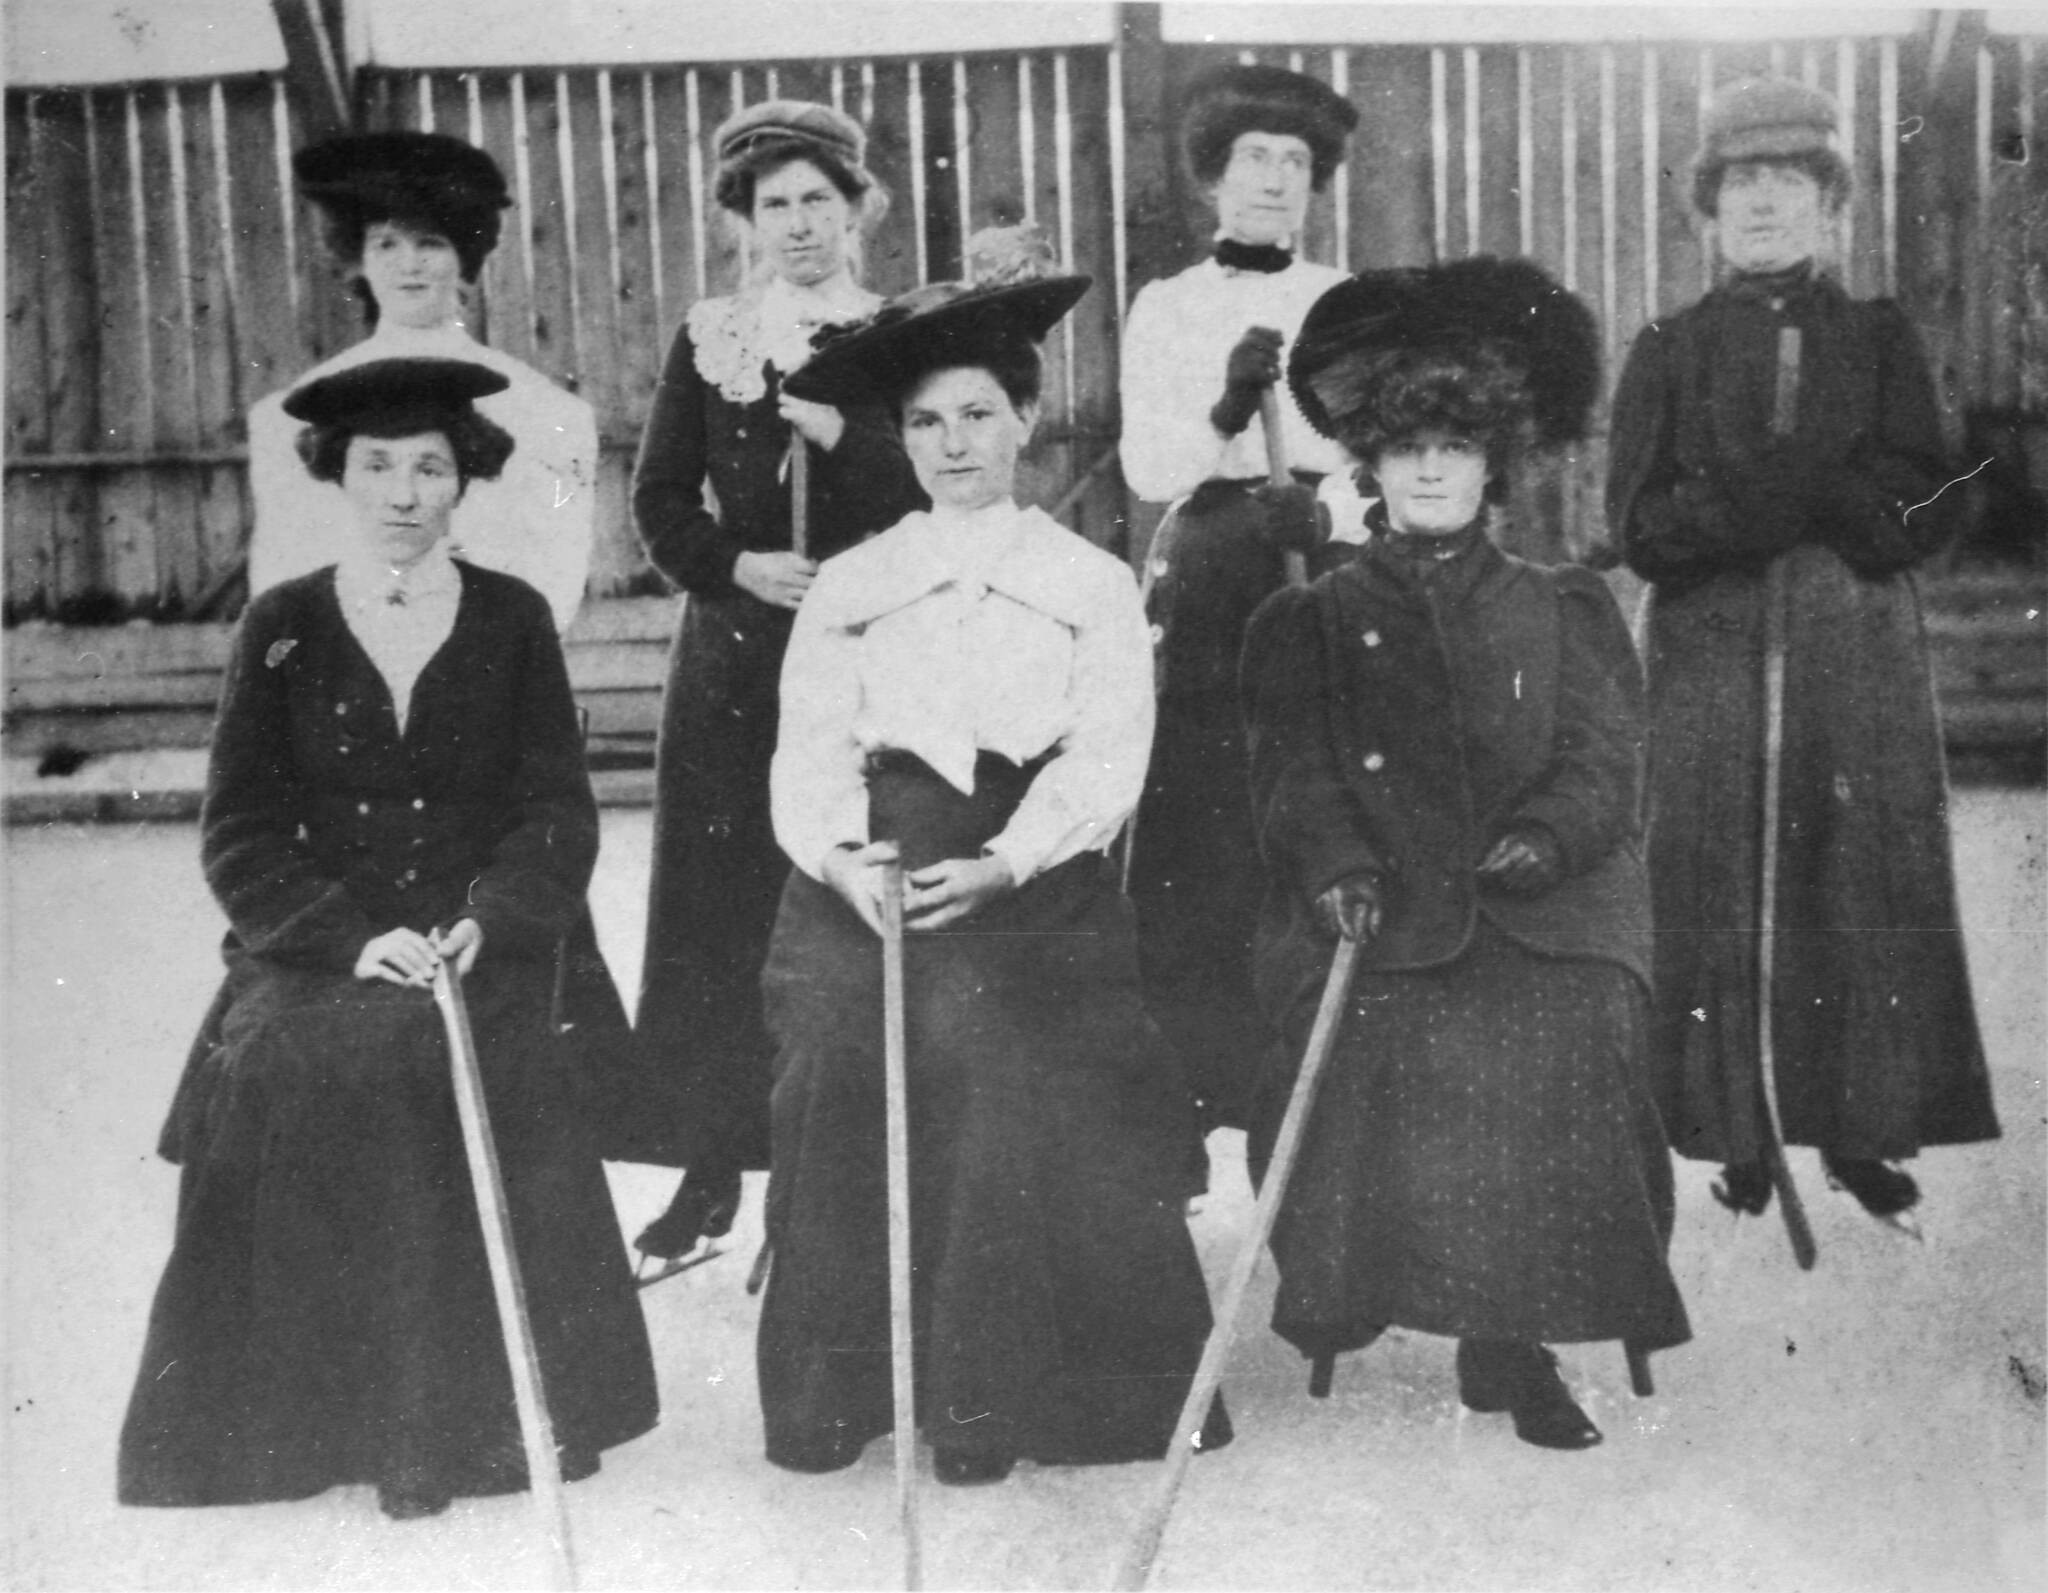 The Lardeau region was one of the earliest areas in the B.C. interior to take to the booming sport of ice hockey, as shown here by this portrait of the Ferguson women’s hockey team, 1907. Do you know when the Canadian Women’s Hockey League was formed? (AL Historical Society)